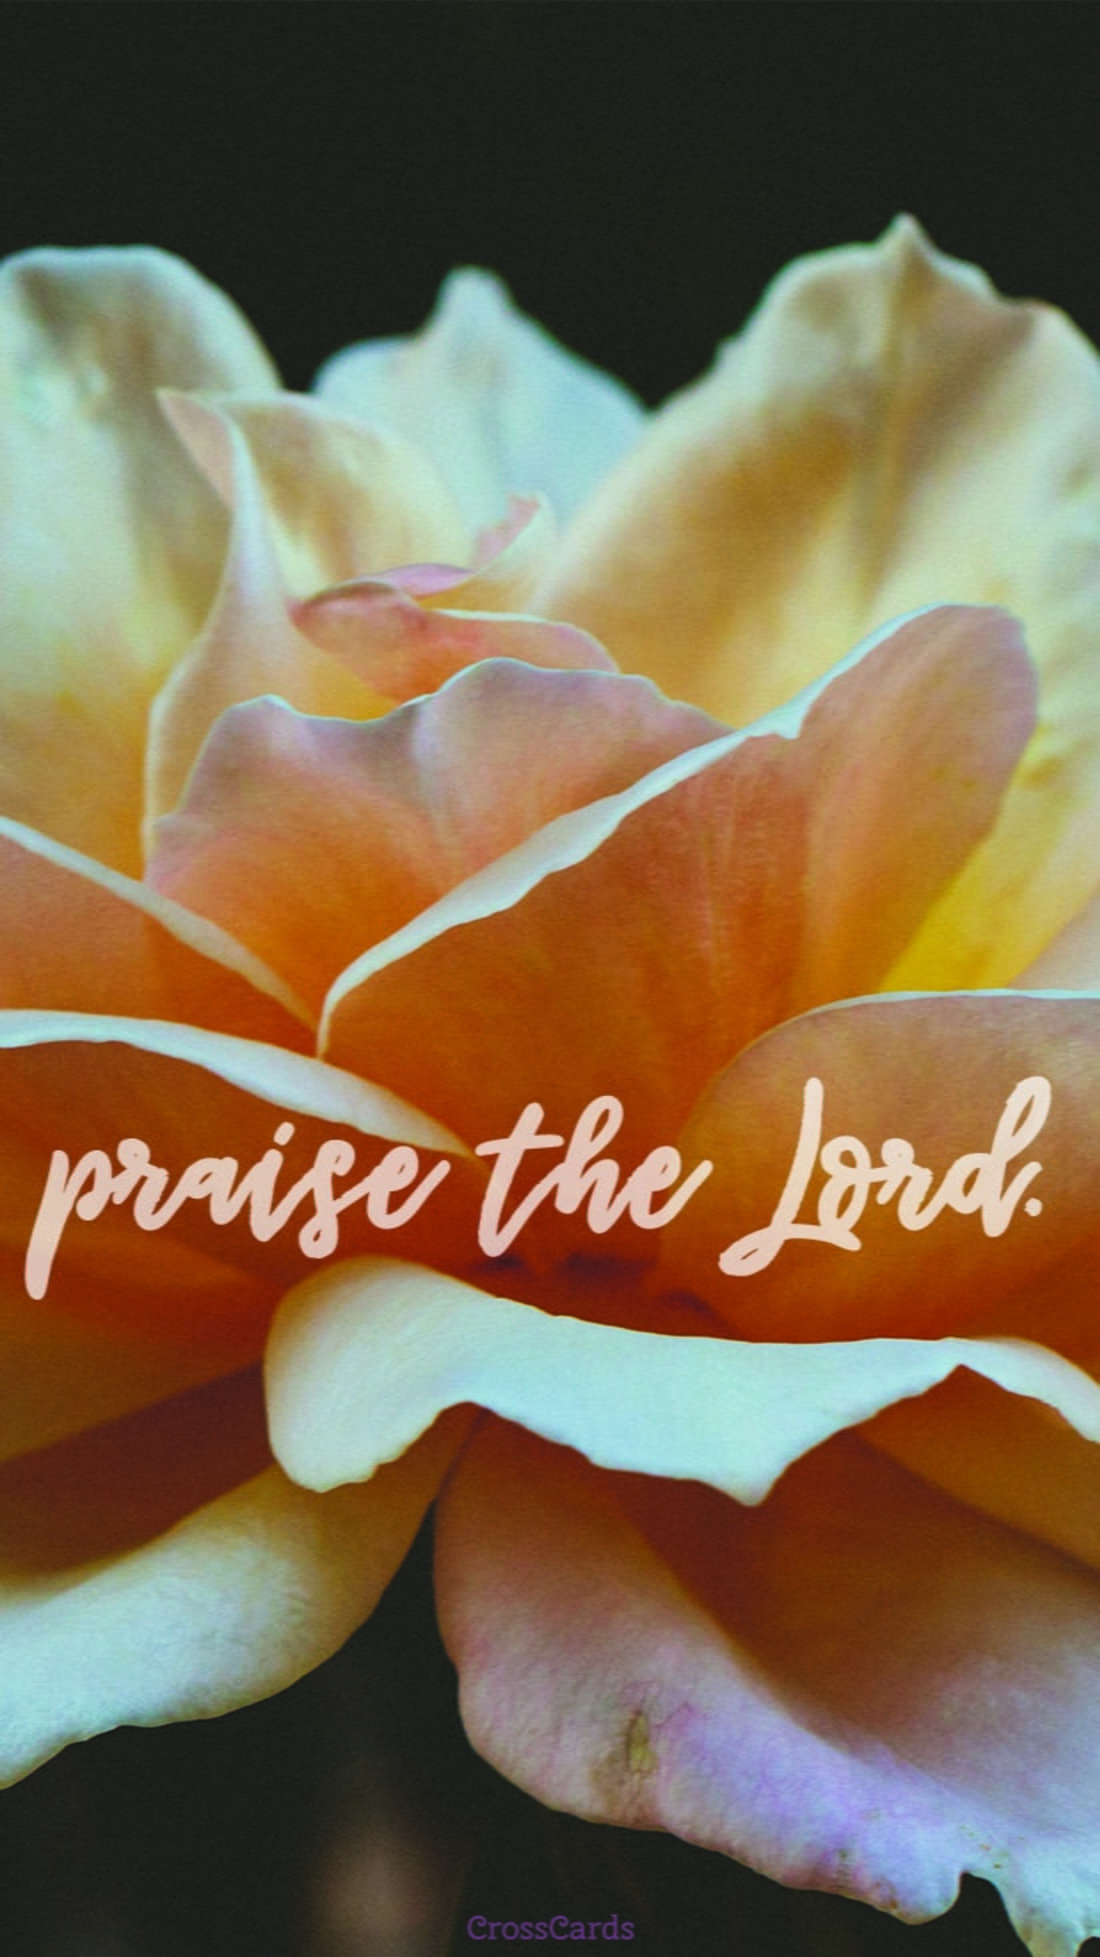 Praise the Lord - Phone Wallpaper and Mobile Background